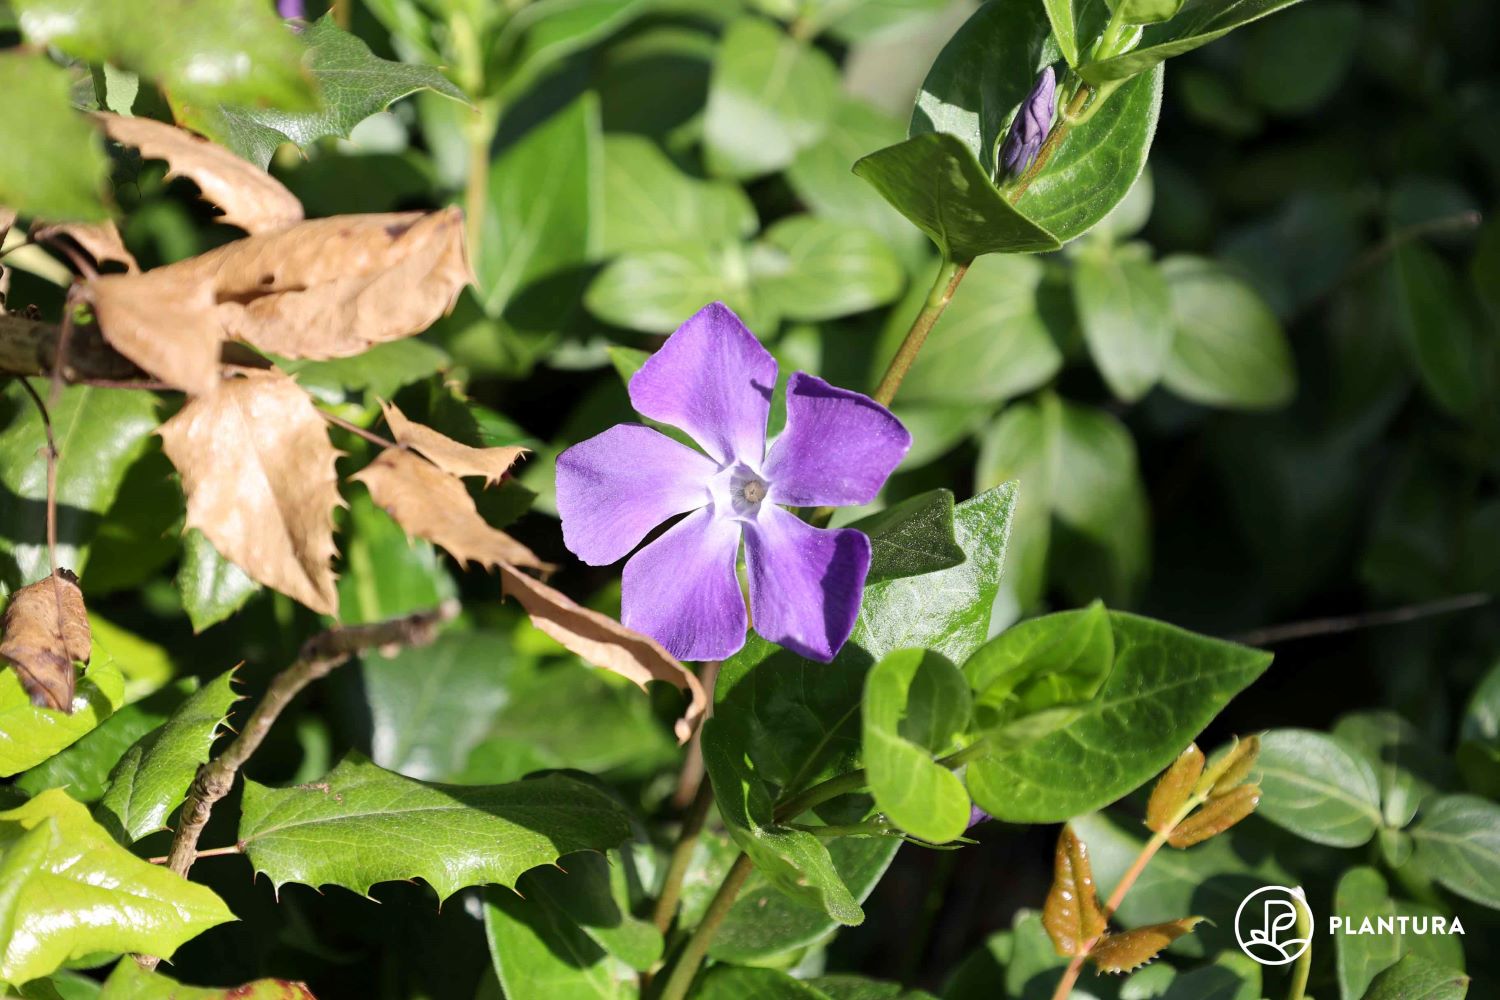 A blooming greater periwinkle